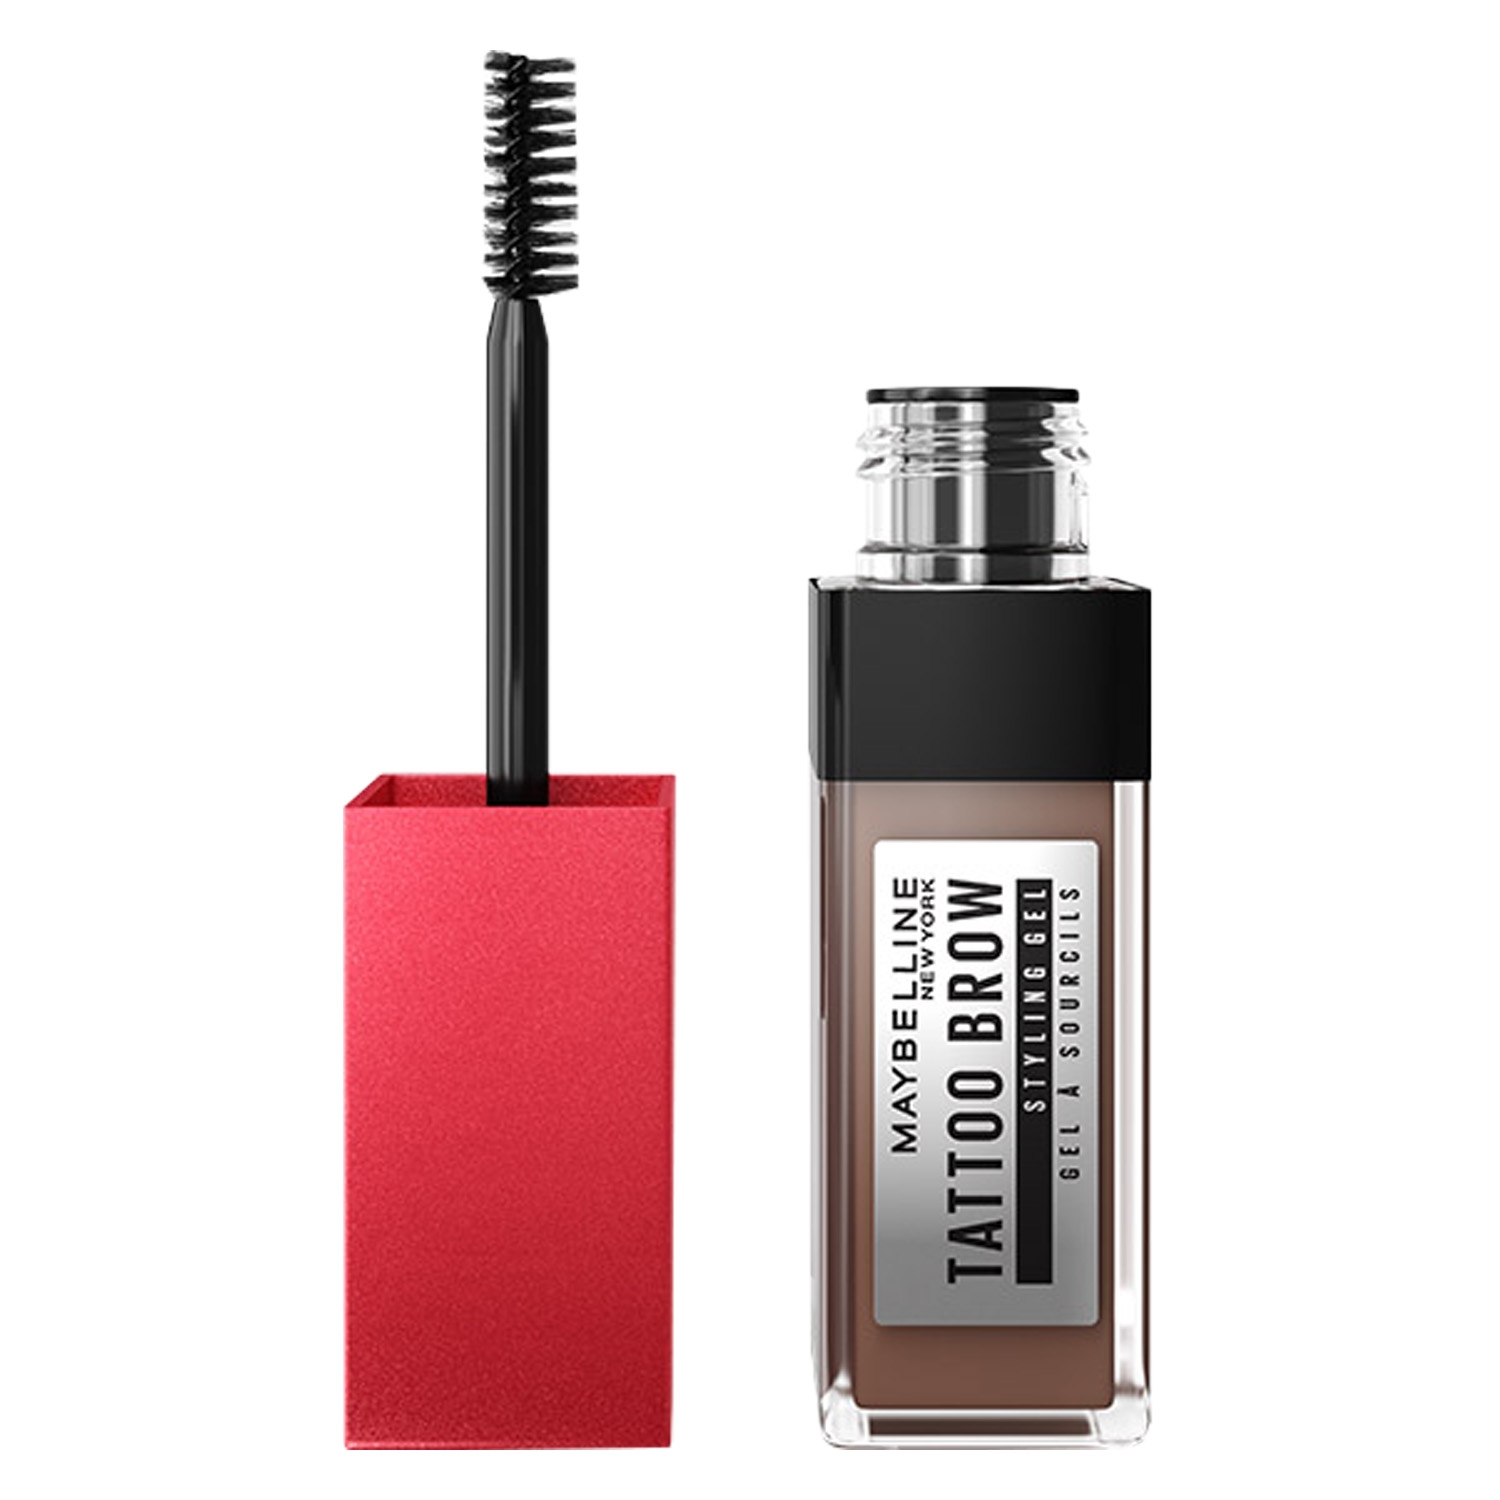 Image du produit de Maybelline NY Brows - Tattoo Brow 36H Styling Gel Nr. 255 Soft Brown